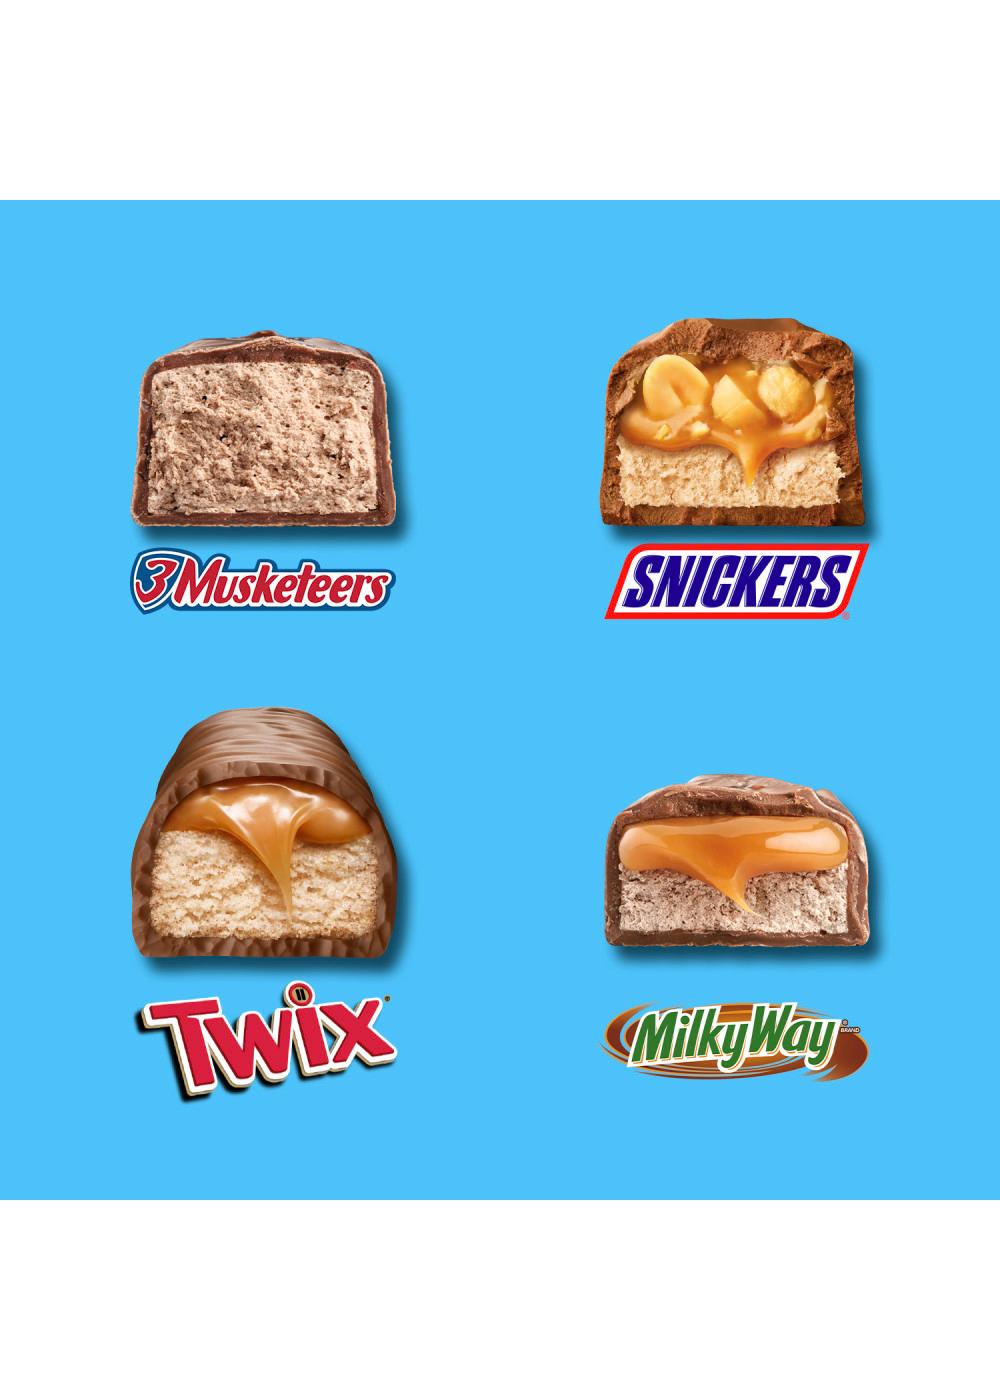 Snickers, Twix, Milky Way, & 3 Musketeers Assorted Minis Chocolate Candy - Sharing Size; image 6 of 7